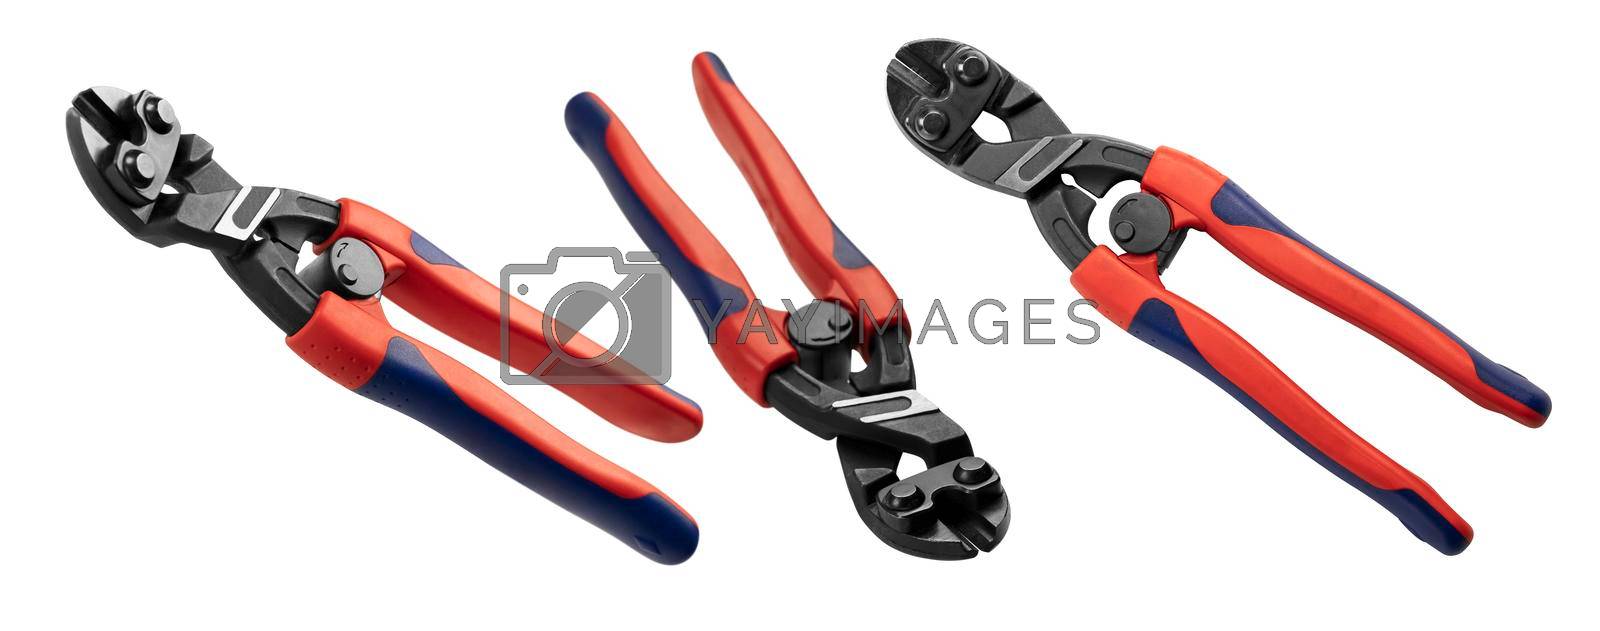 Royalty free image of Diagonal wire cutters in different angles on a white background by butenkow